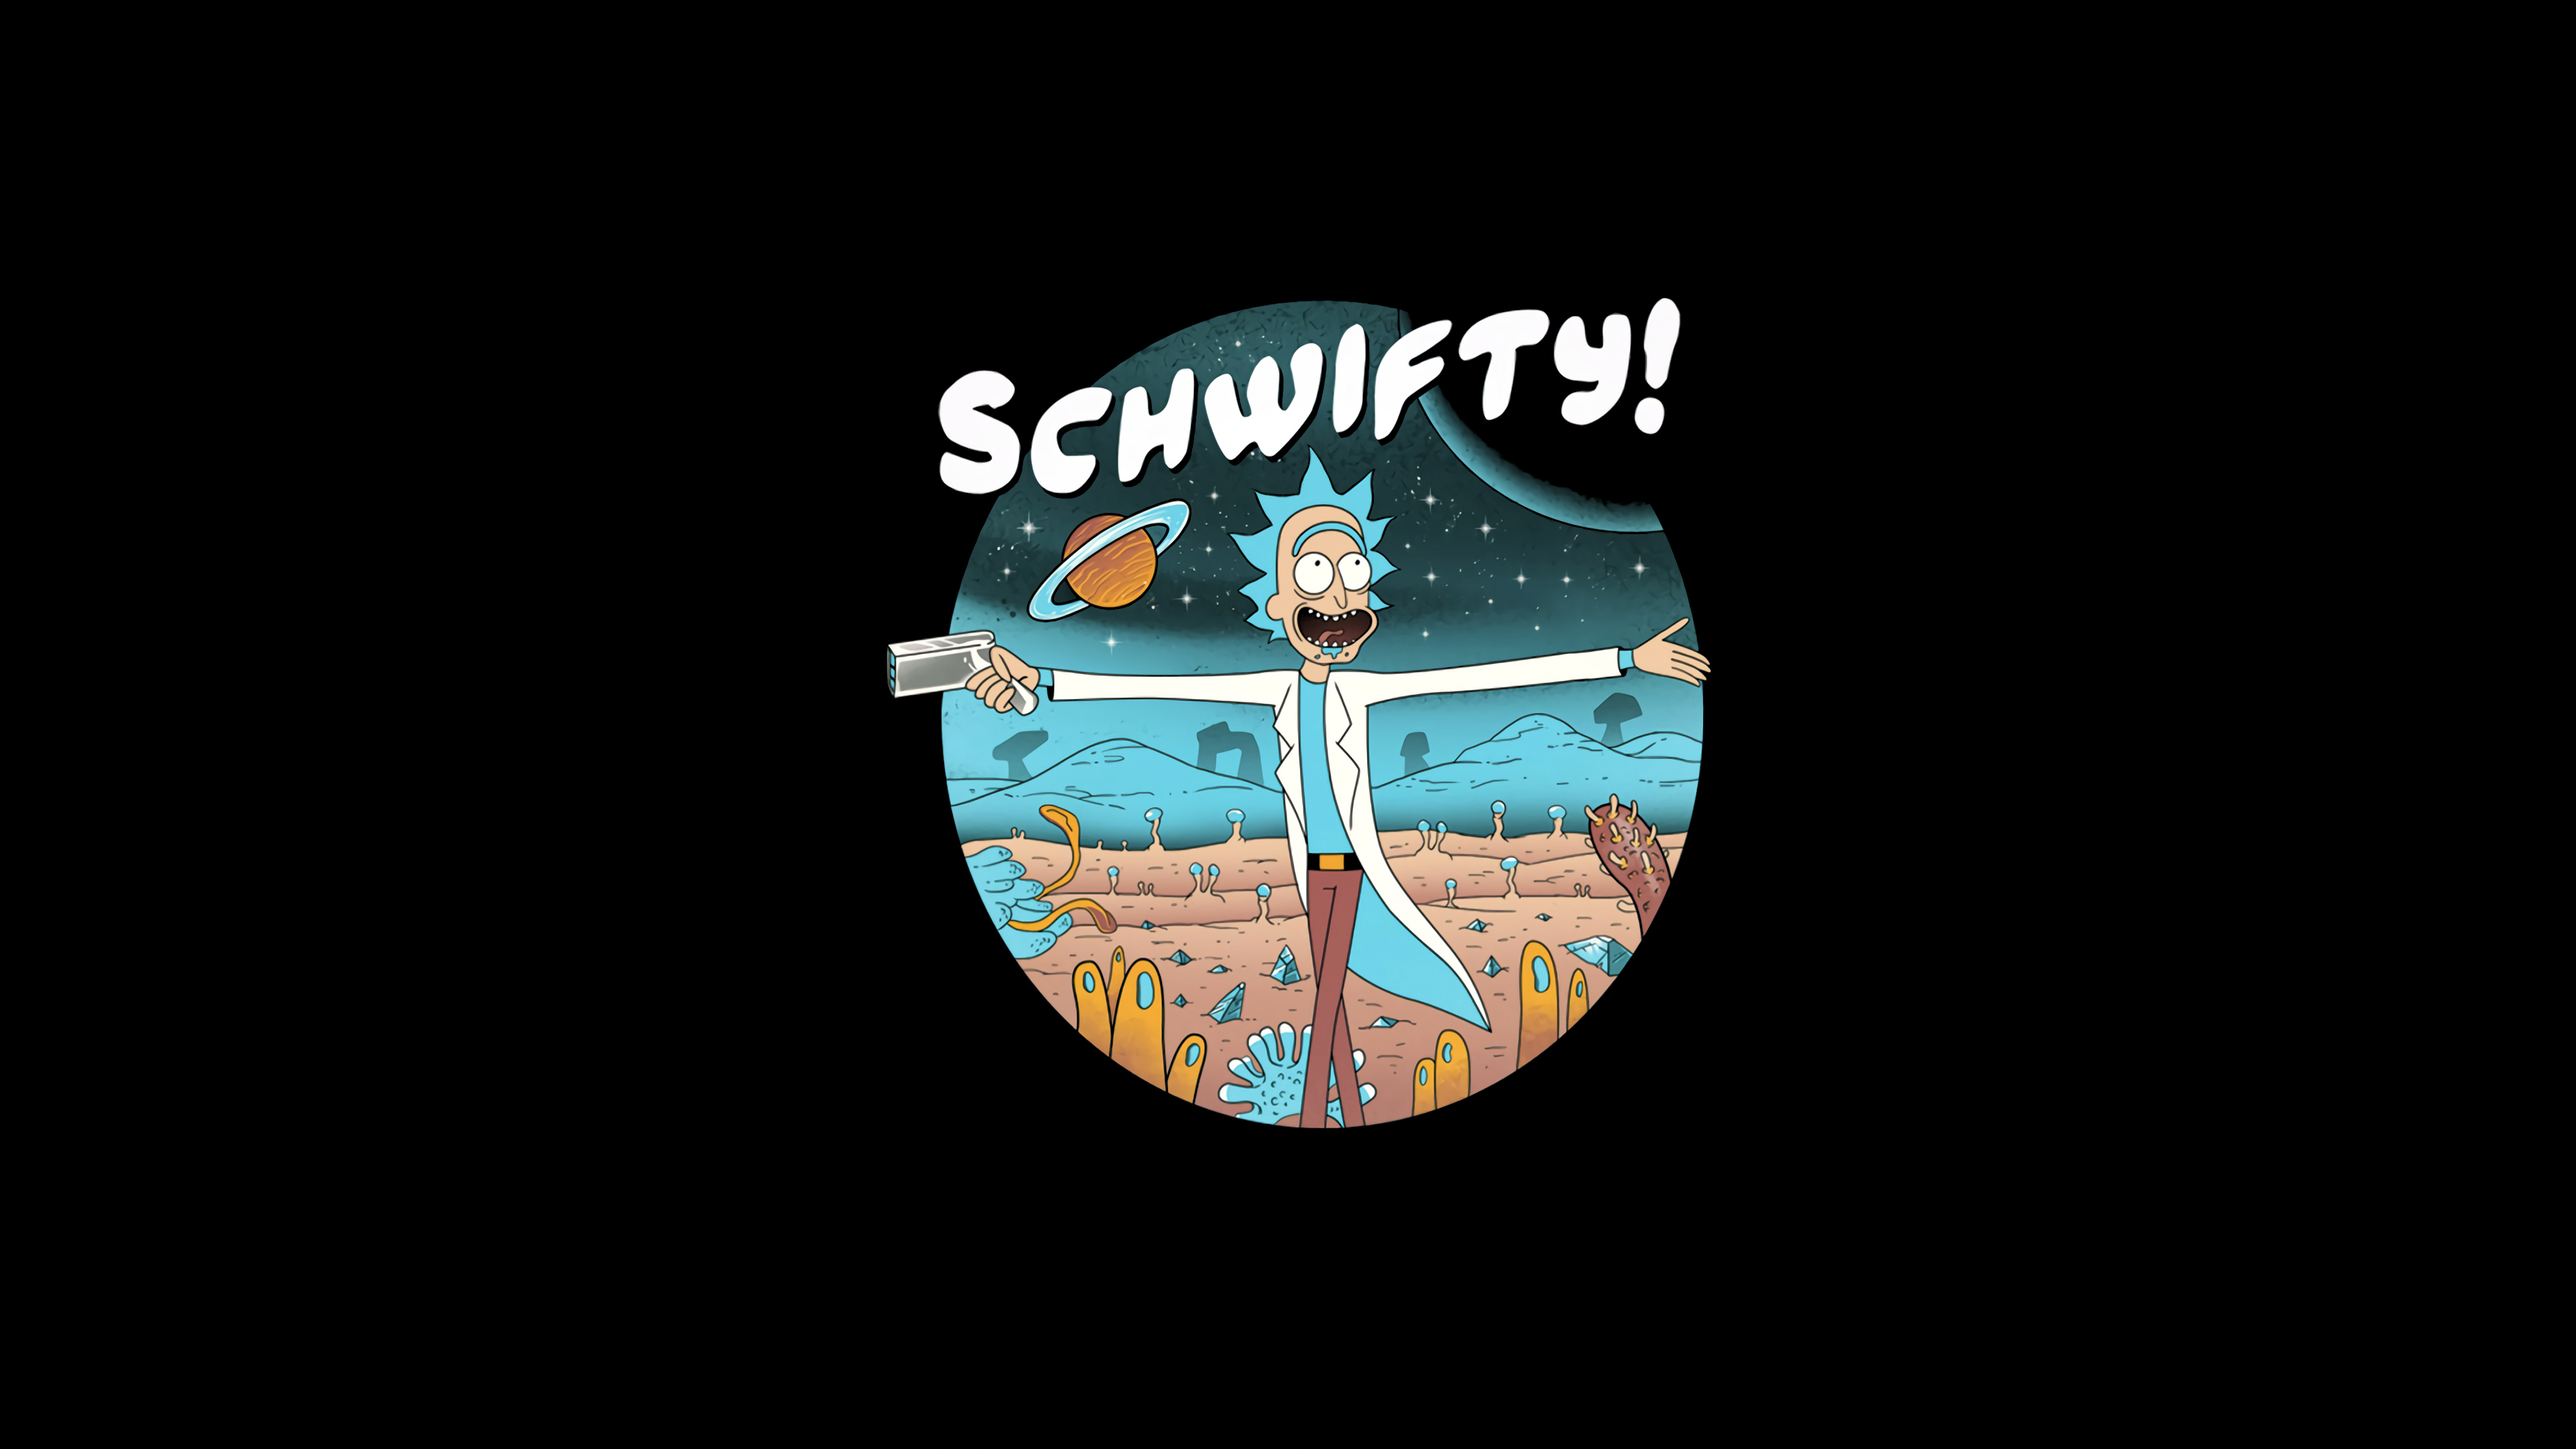 Wallpaper Rick Sanchez from Rick and Morty Schwifty